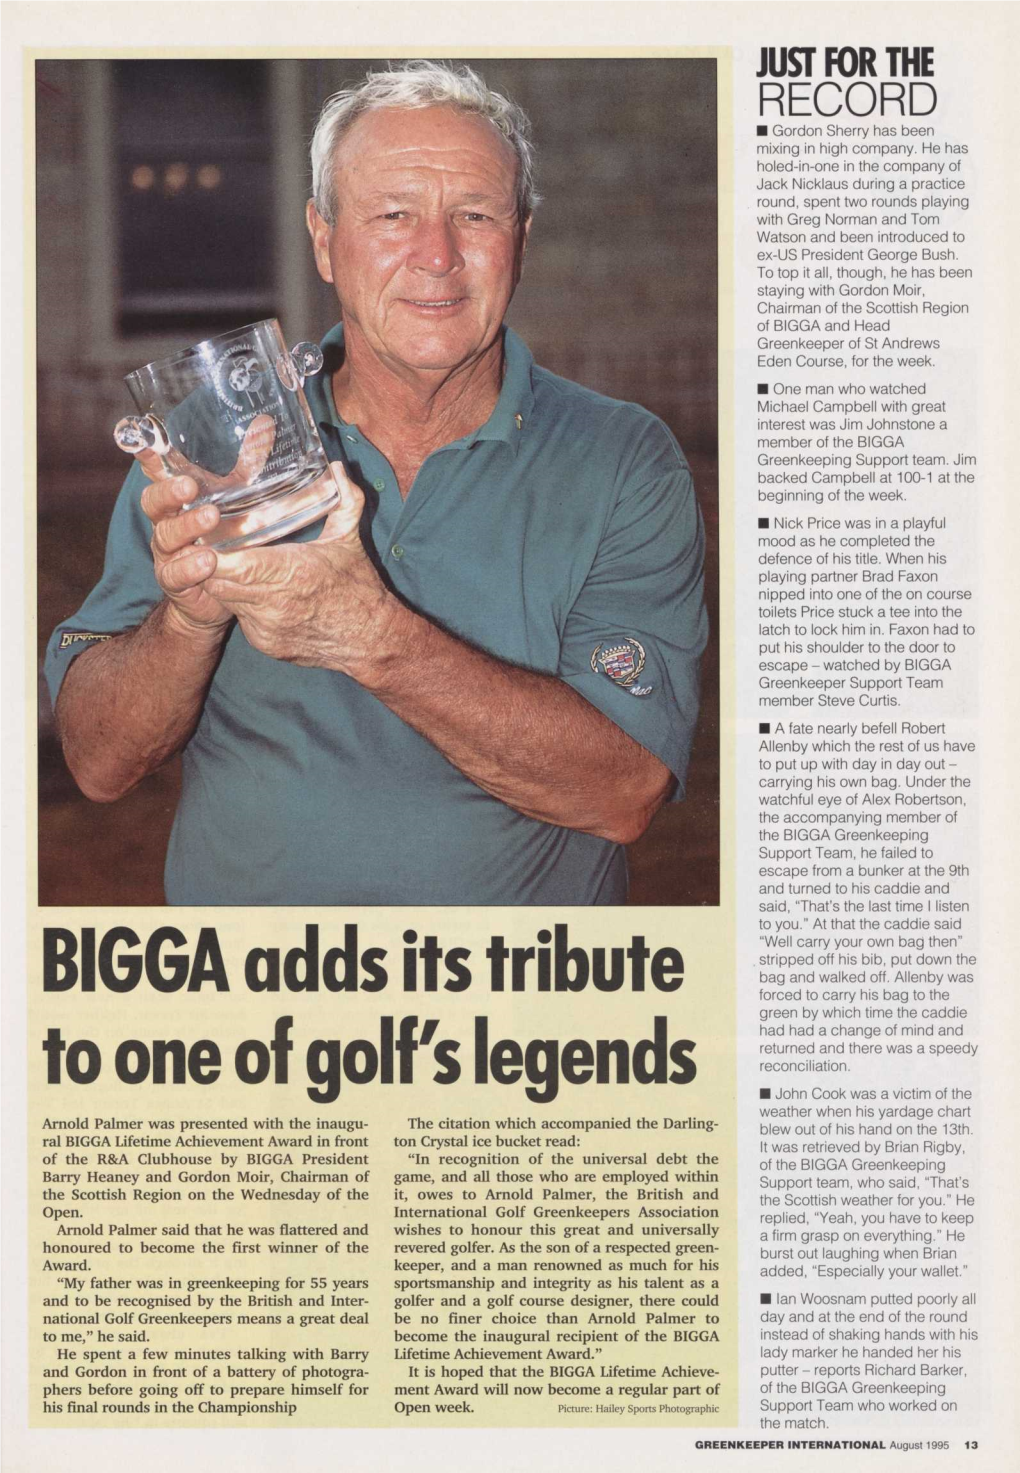 BIGGA Adds Its Tribute to One of Golfs Legends